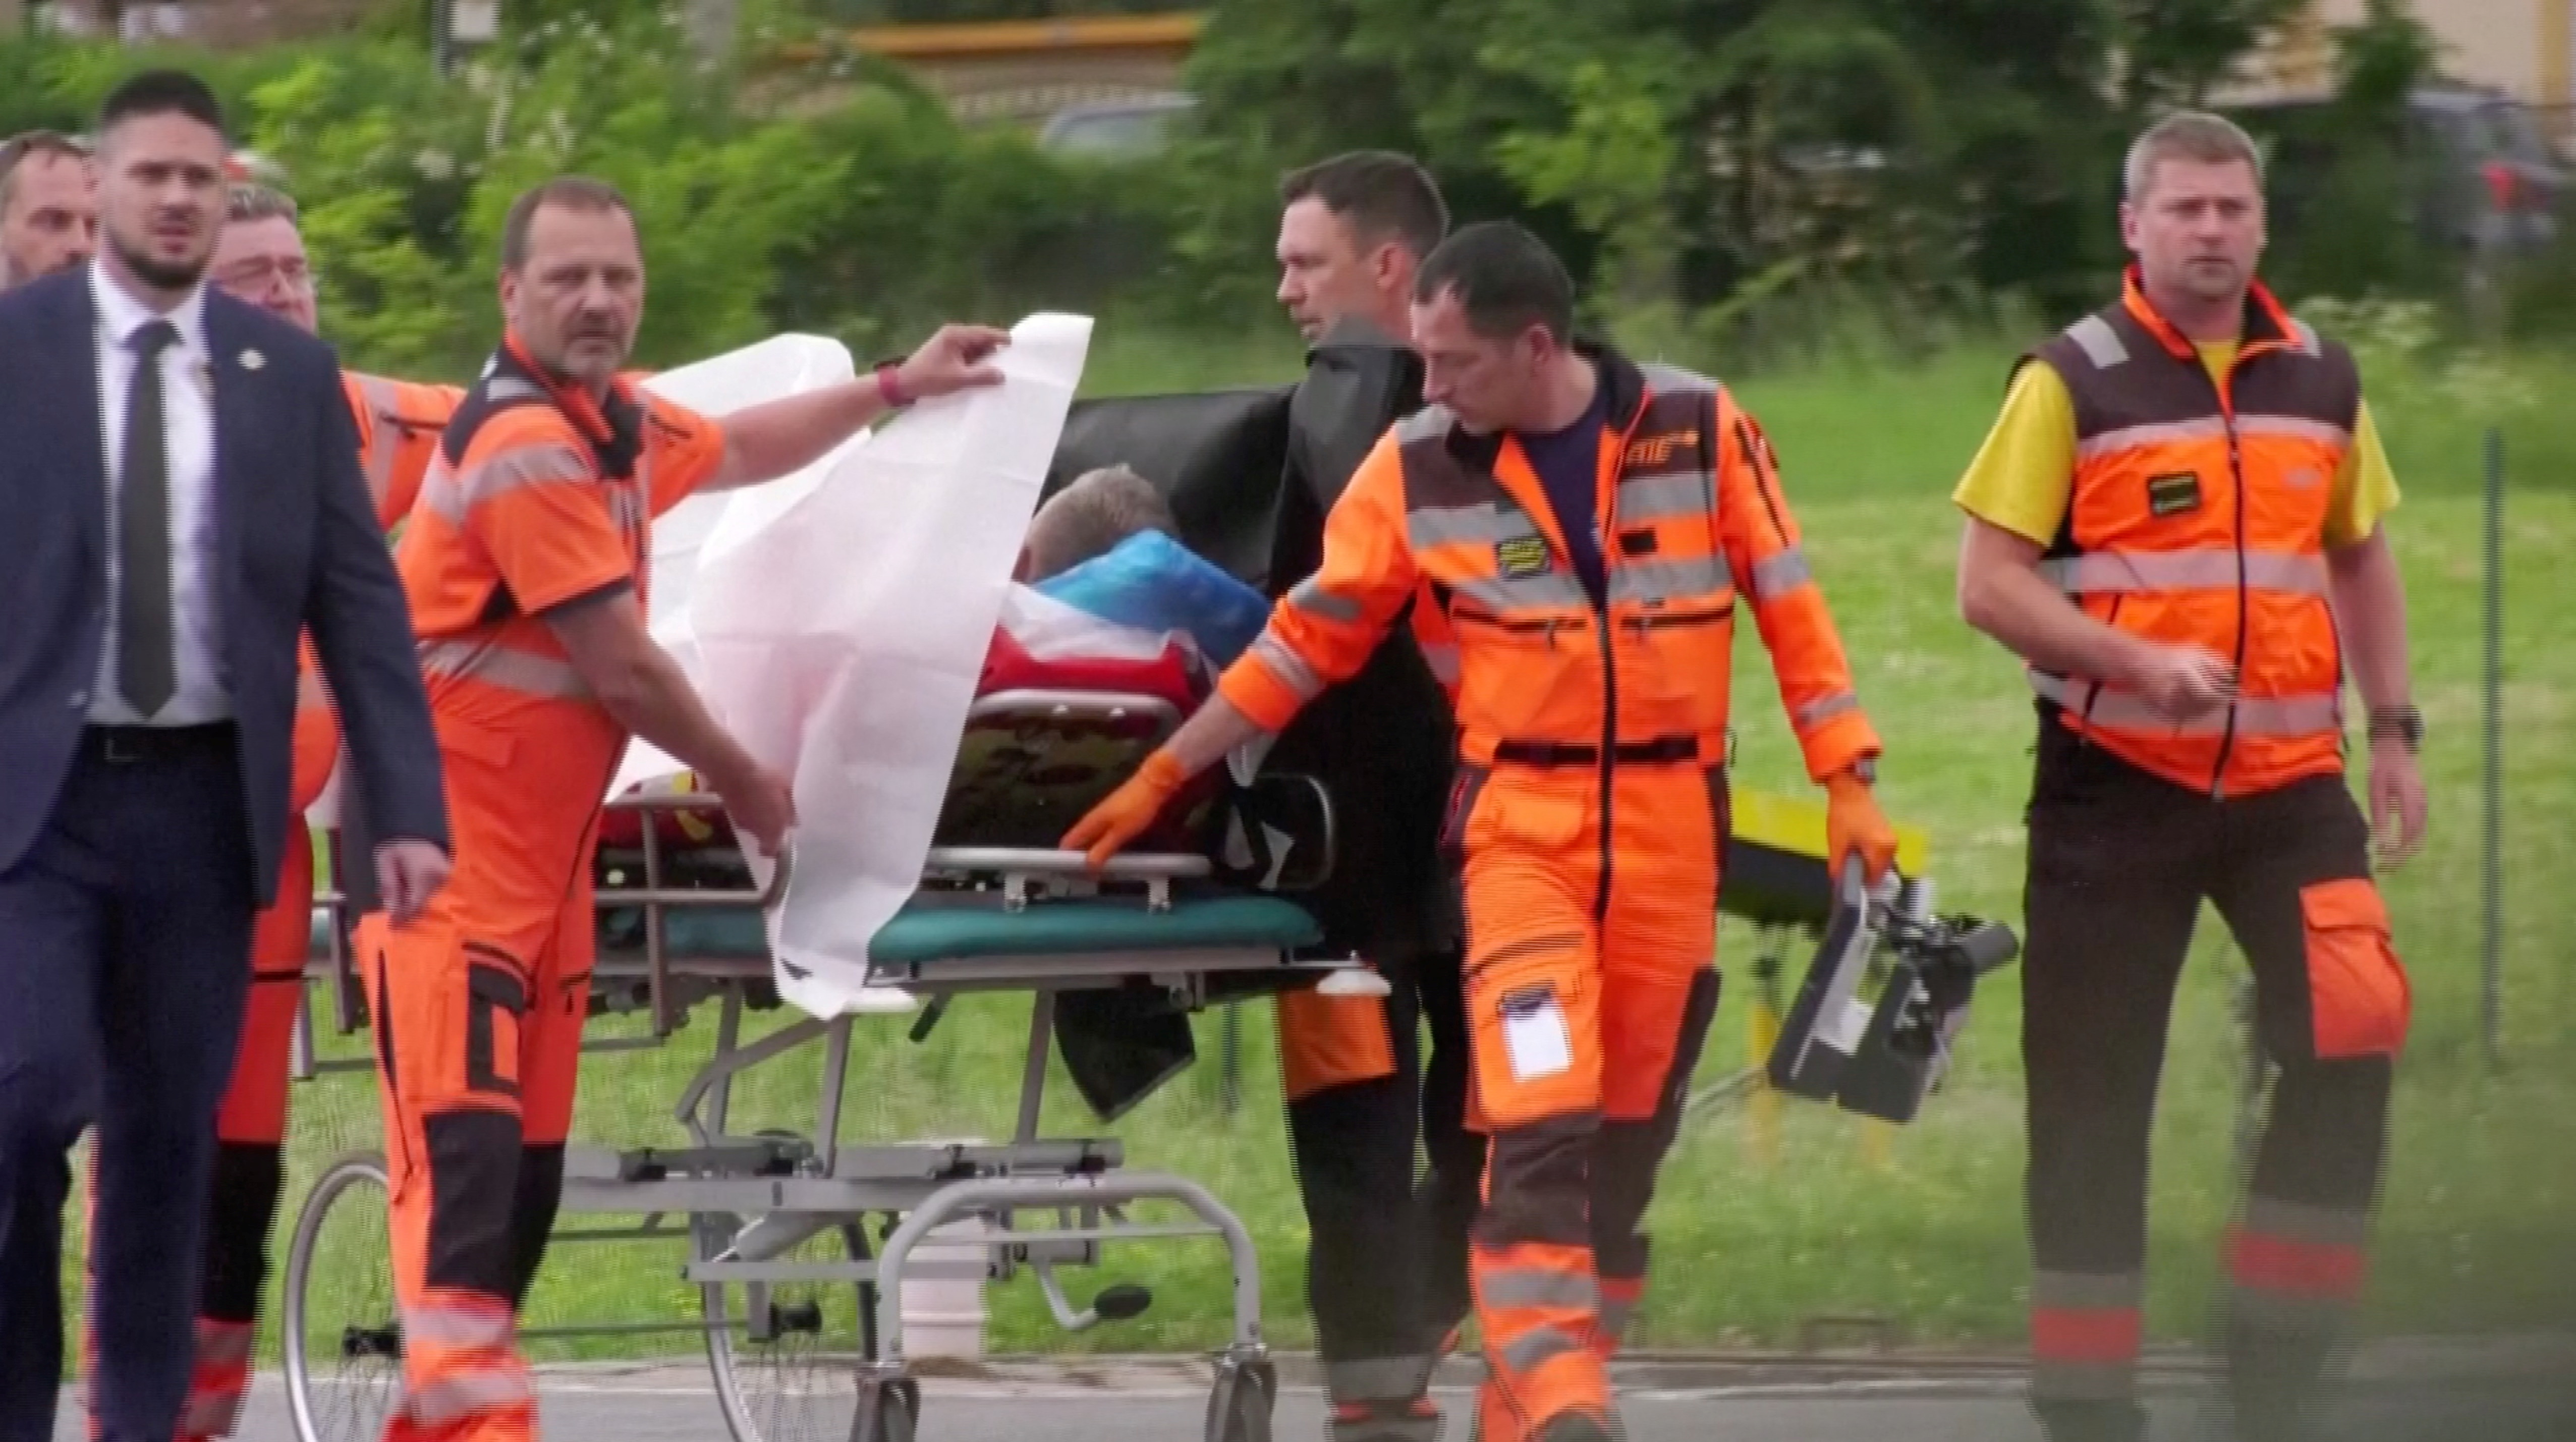 Slovak PM Fico transported in helicopter to hospital after shooting